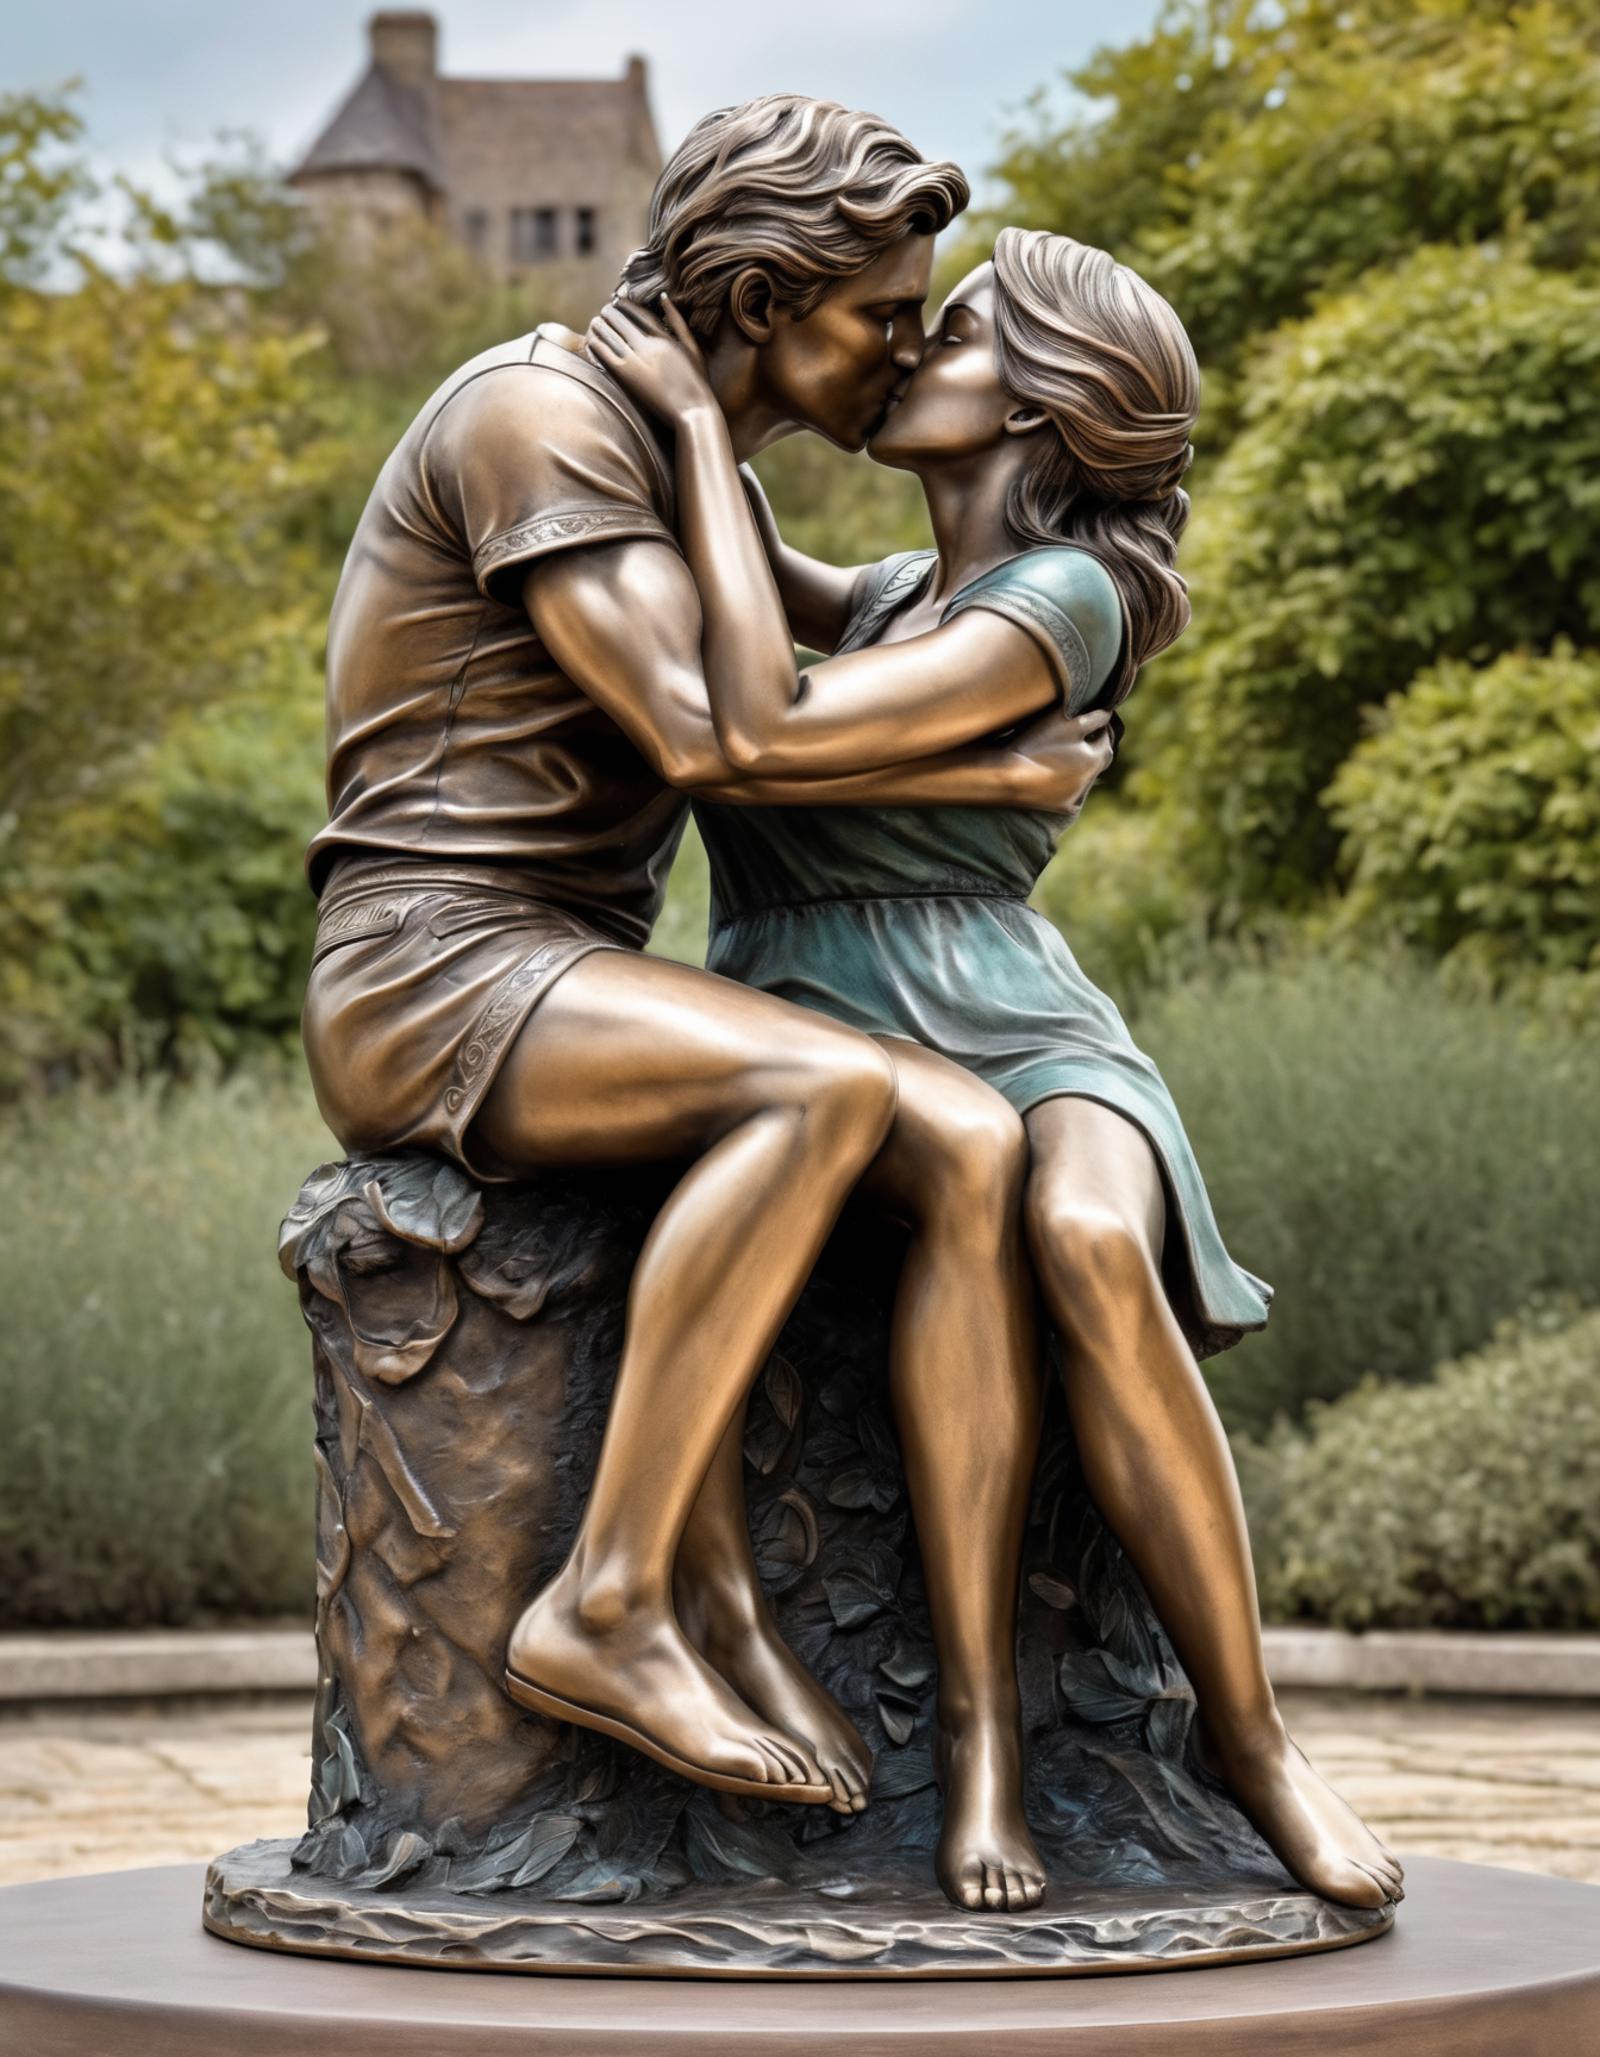 A statue of a man and woman kissing.